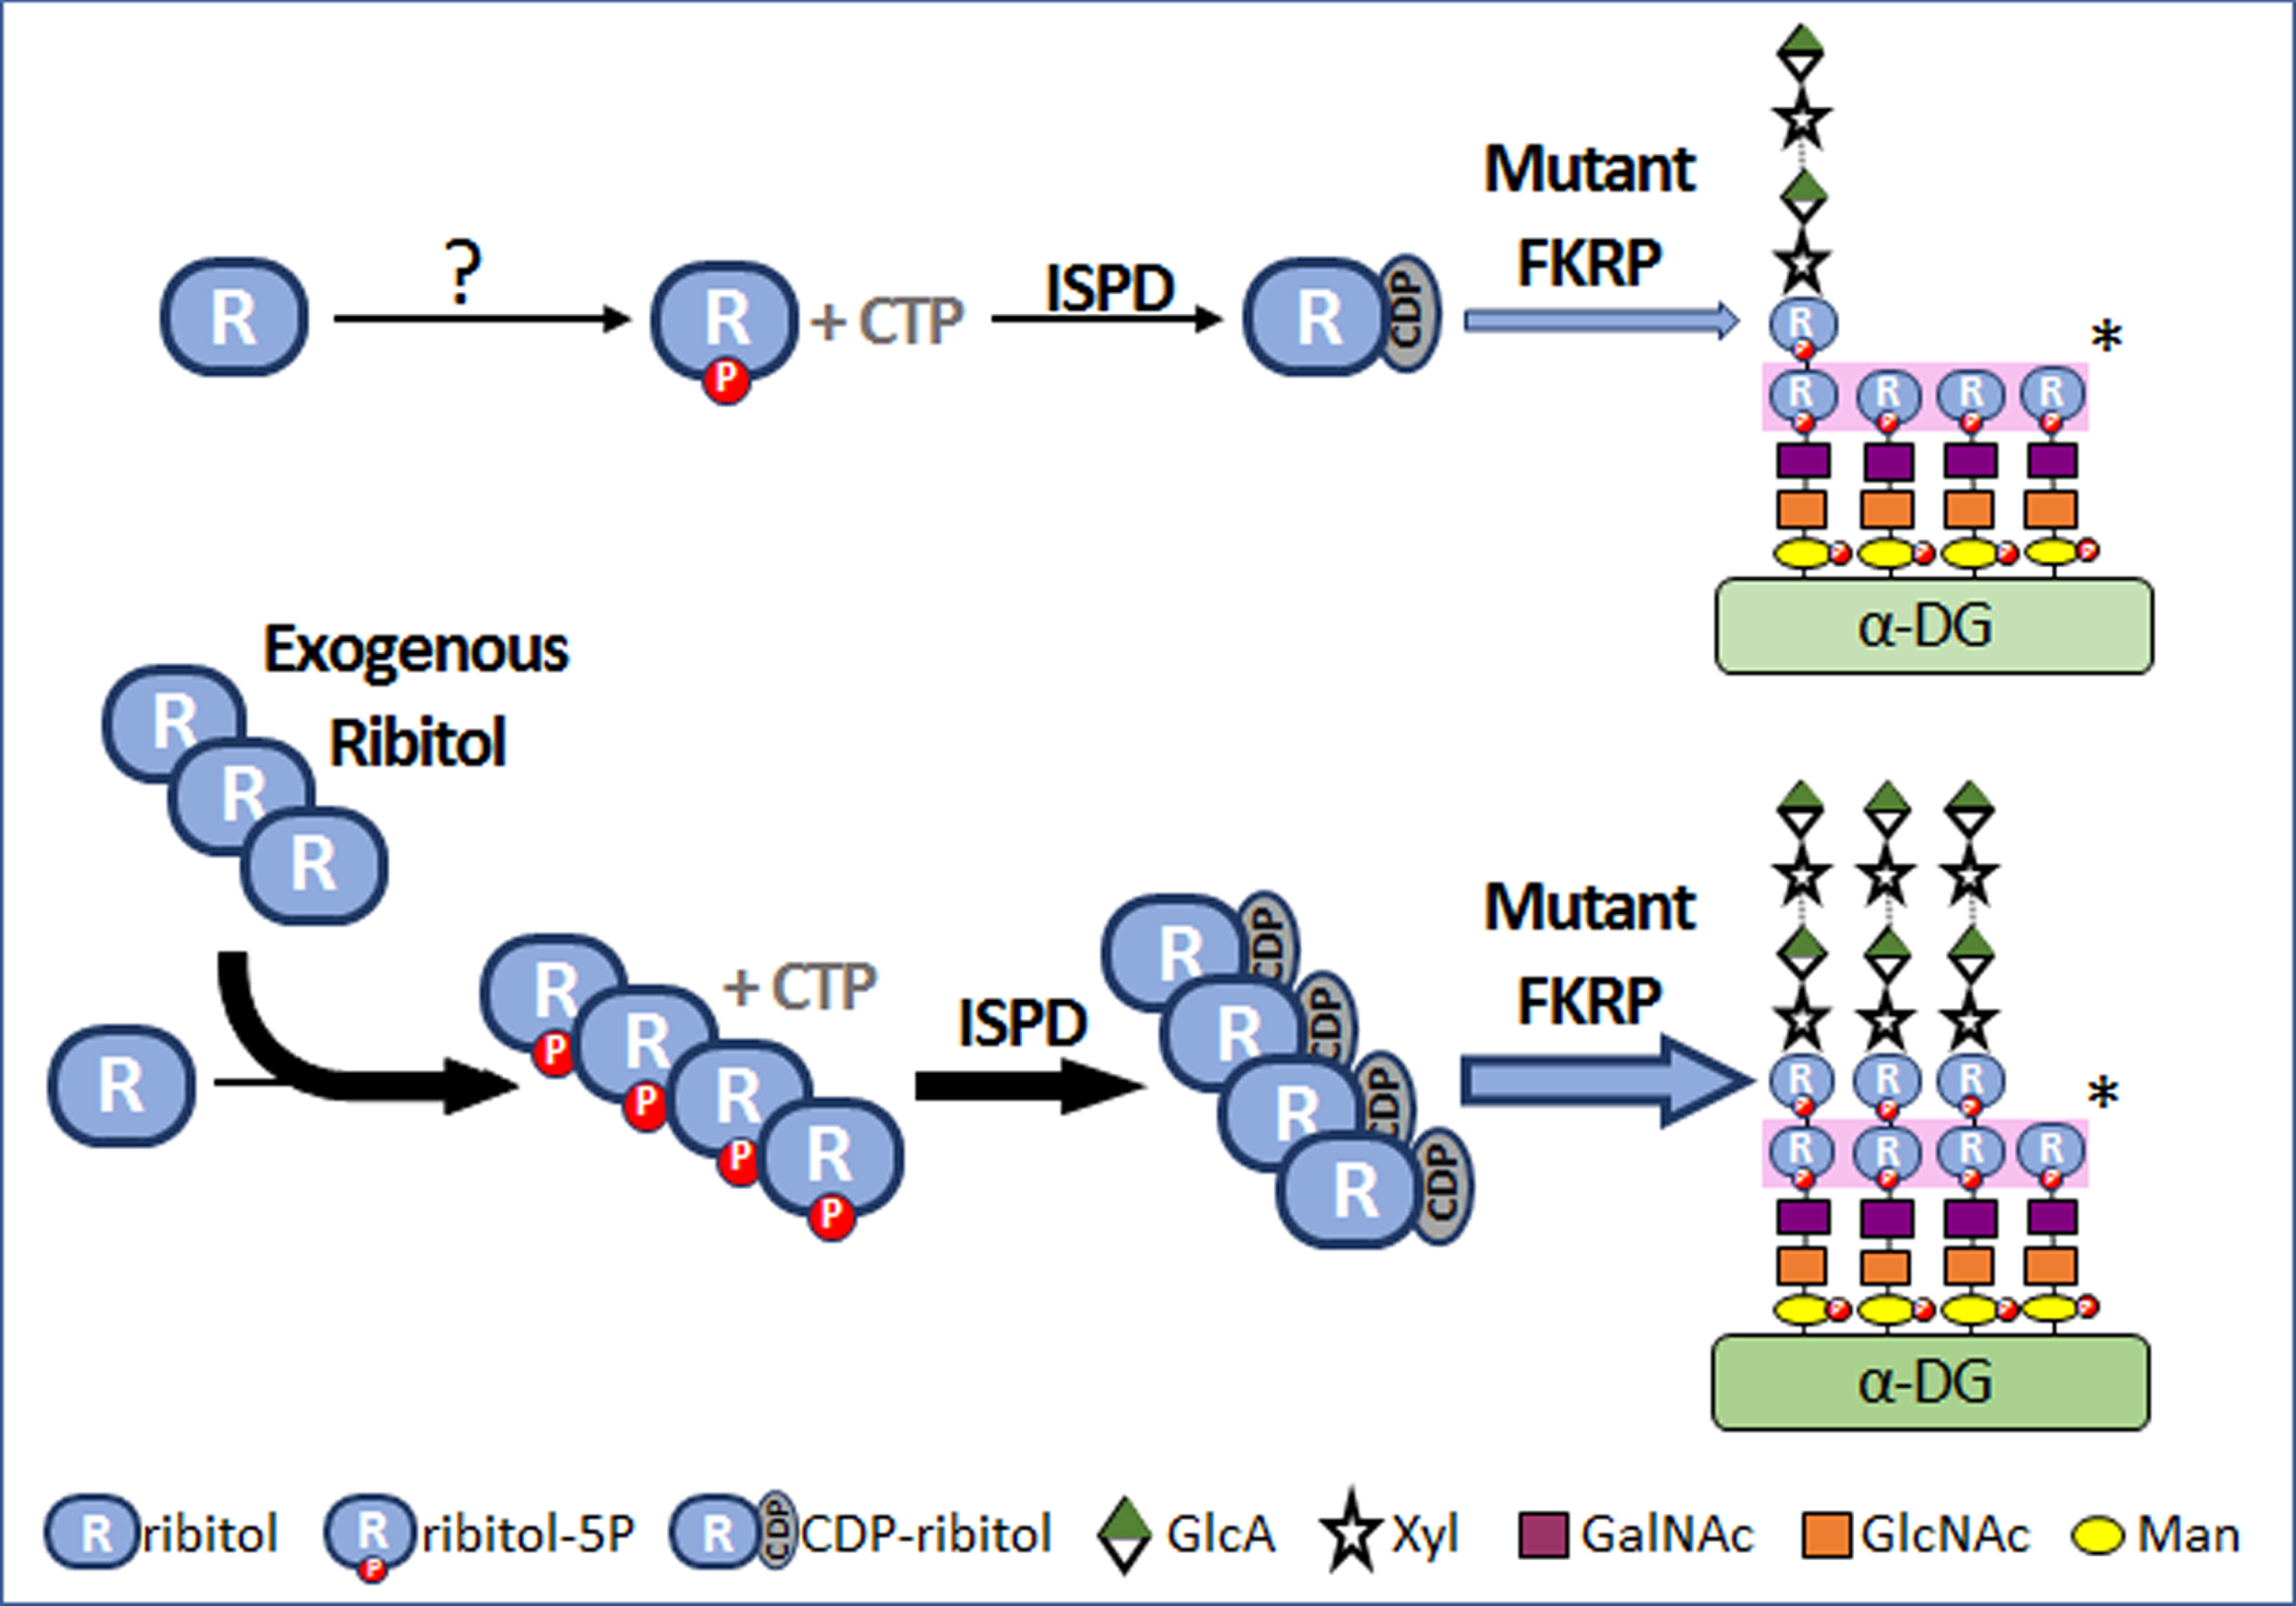 Mechanism of ribitol-induced matriglycan expression in FKRP mutant cells. “?”, mechanism(s) is not understood. “*”, Each monosaccharide is transferred to the glycan of α-DG by specific glycosyltransferase and the first and second ribitol-5P on the glycan chains are transferred by Fukutin and FKRP respectively. P, phosphate. ISPD, isoprenoid synthase domain containing gene. CTP, cytidine triphosphate. CDP, cytidine diphosphate.